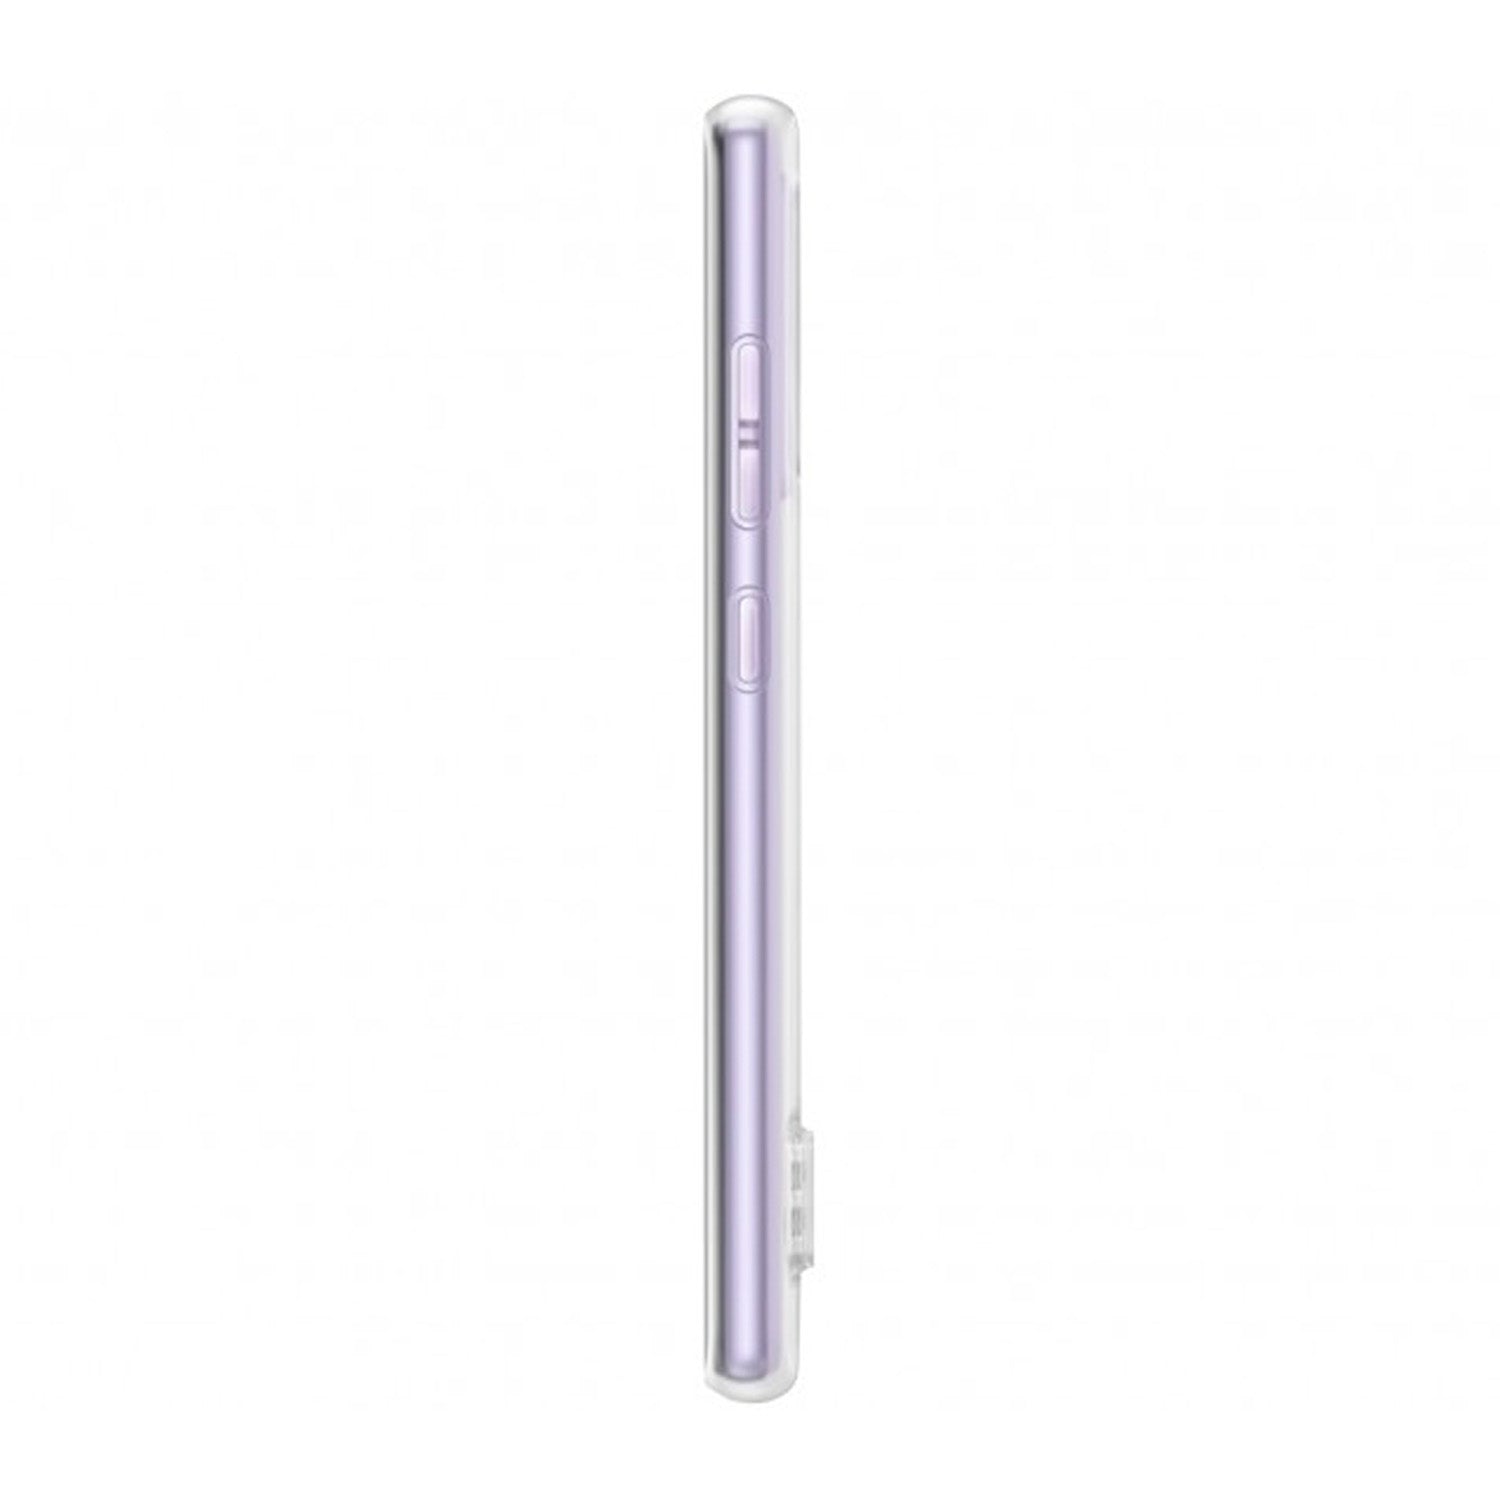 Samsung A52 / A52 5G Standing Cover Clear